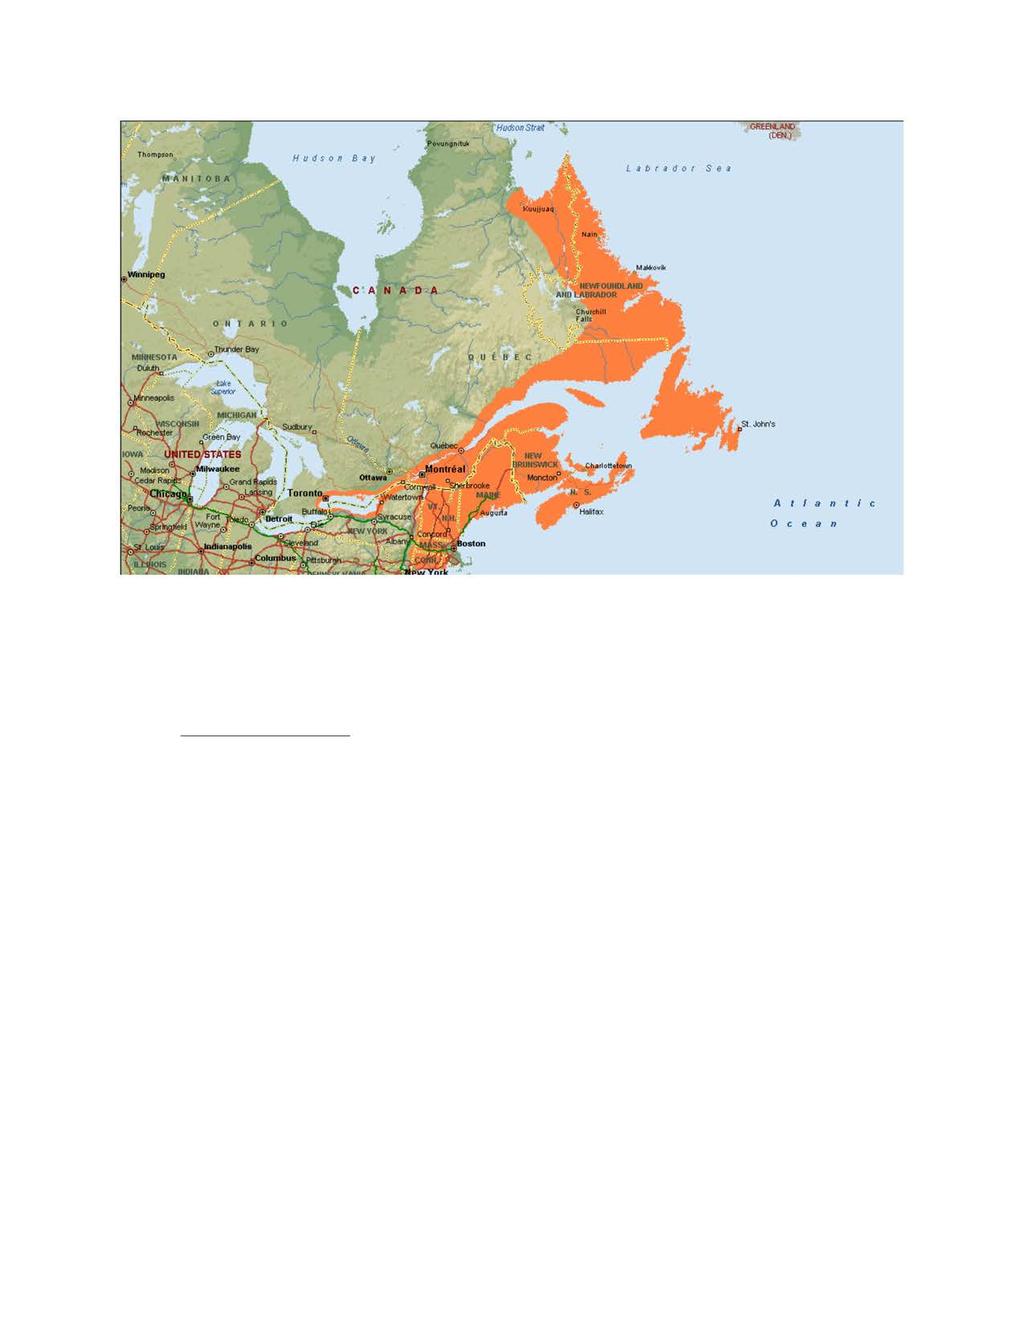 GREENLAND (DEN.) Hvdson Bay Labrador Sea,... i i i OHTARIO NAD -A_, st. John's A 0 c e a n I a n t i c Figure 2. Original range of Atlantic salmon in the United States and Canada. http://www.